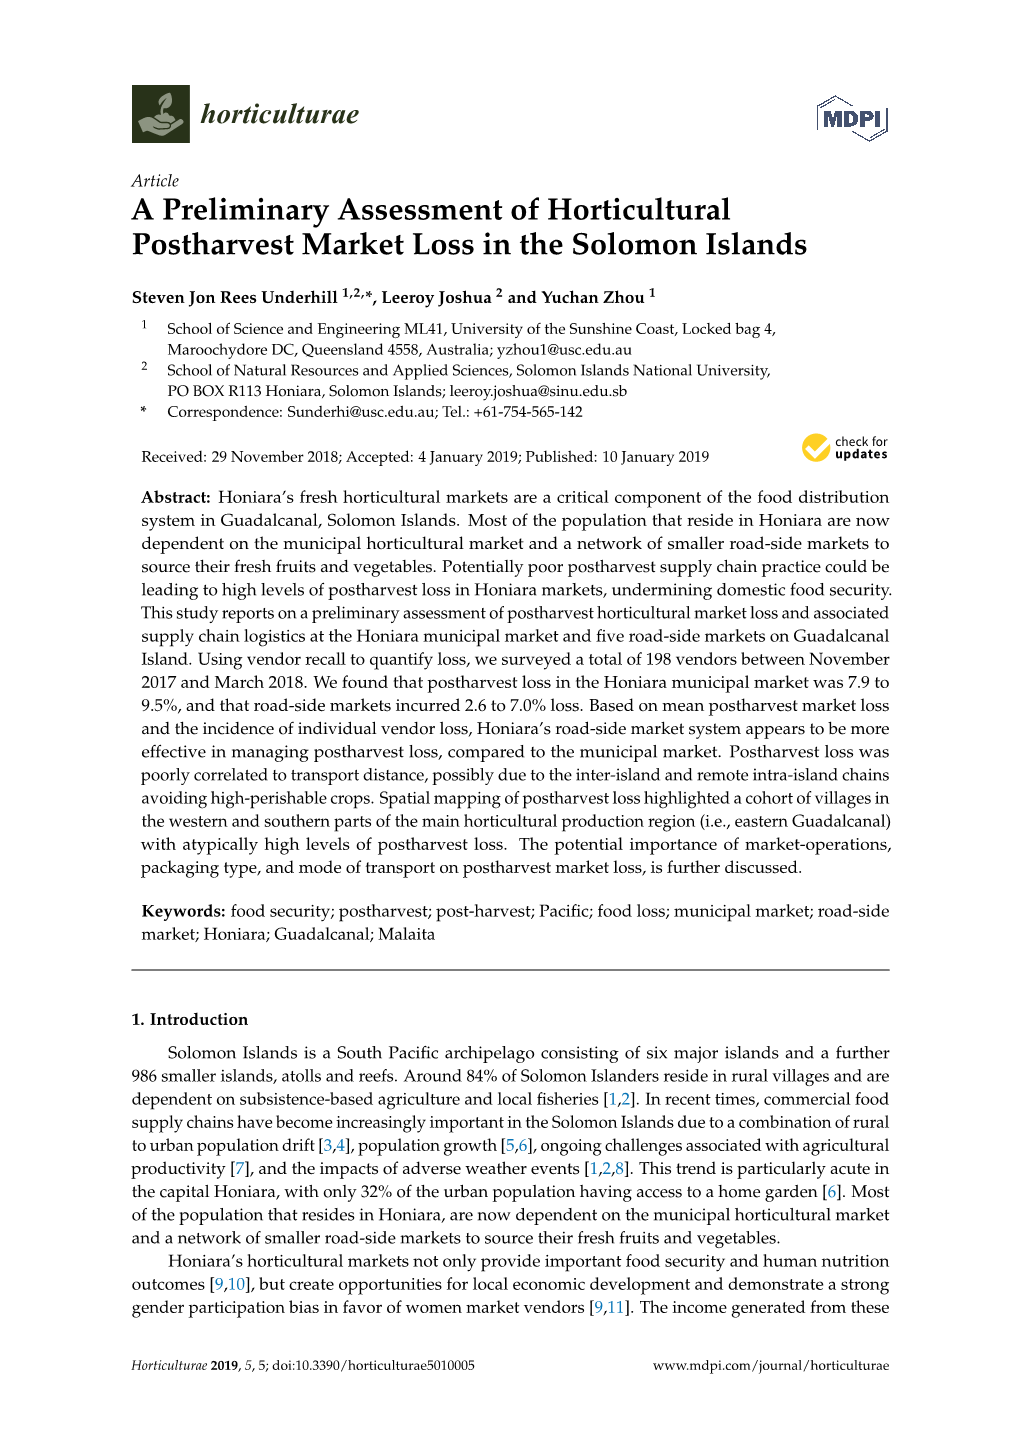 A Preliminary Assessment of Horticultural Postharvest Market Loss in the Solomon Islands